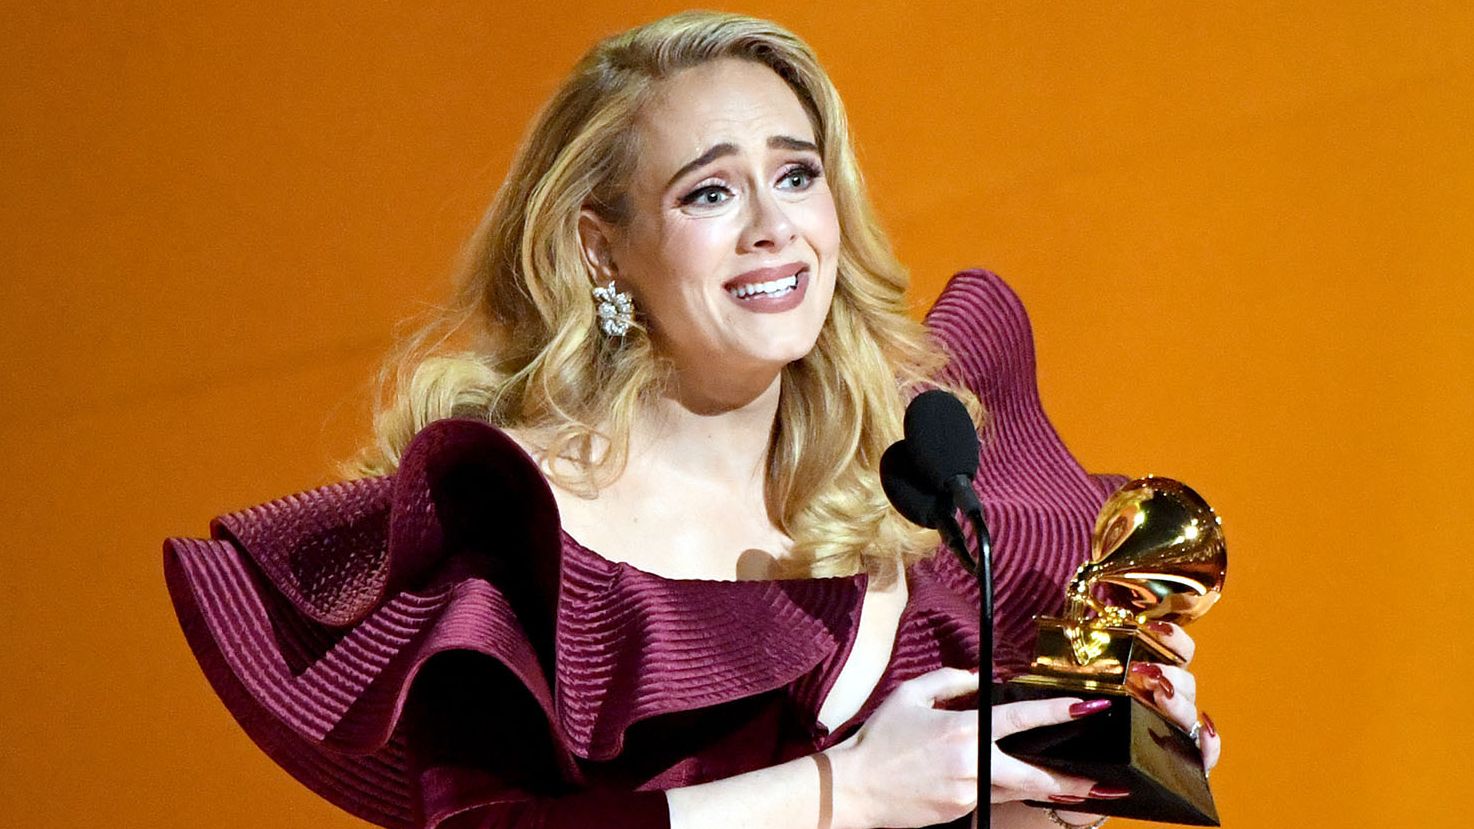 Adele Cries to Her Music, Too - The New York Times